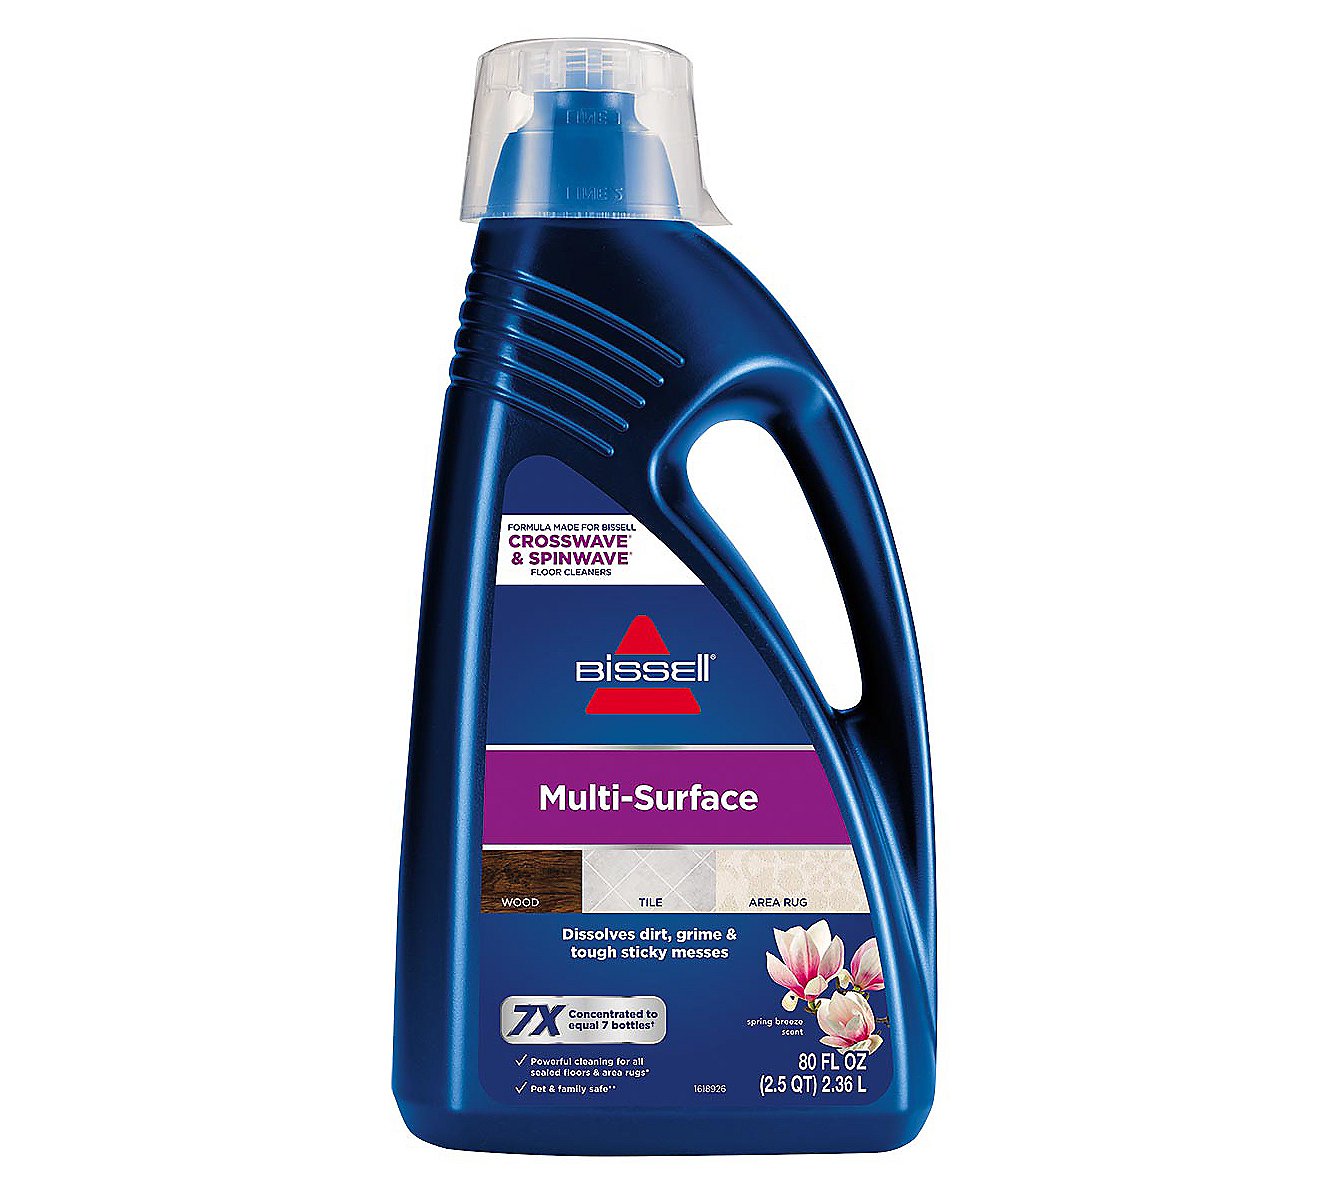 BISSELL Multi-Surface Floor Cleaning Formula (80-oz)